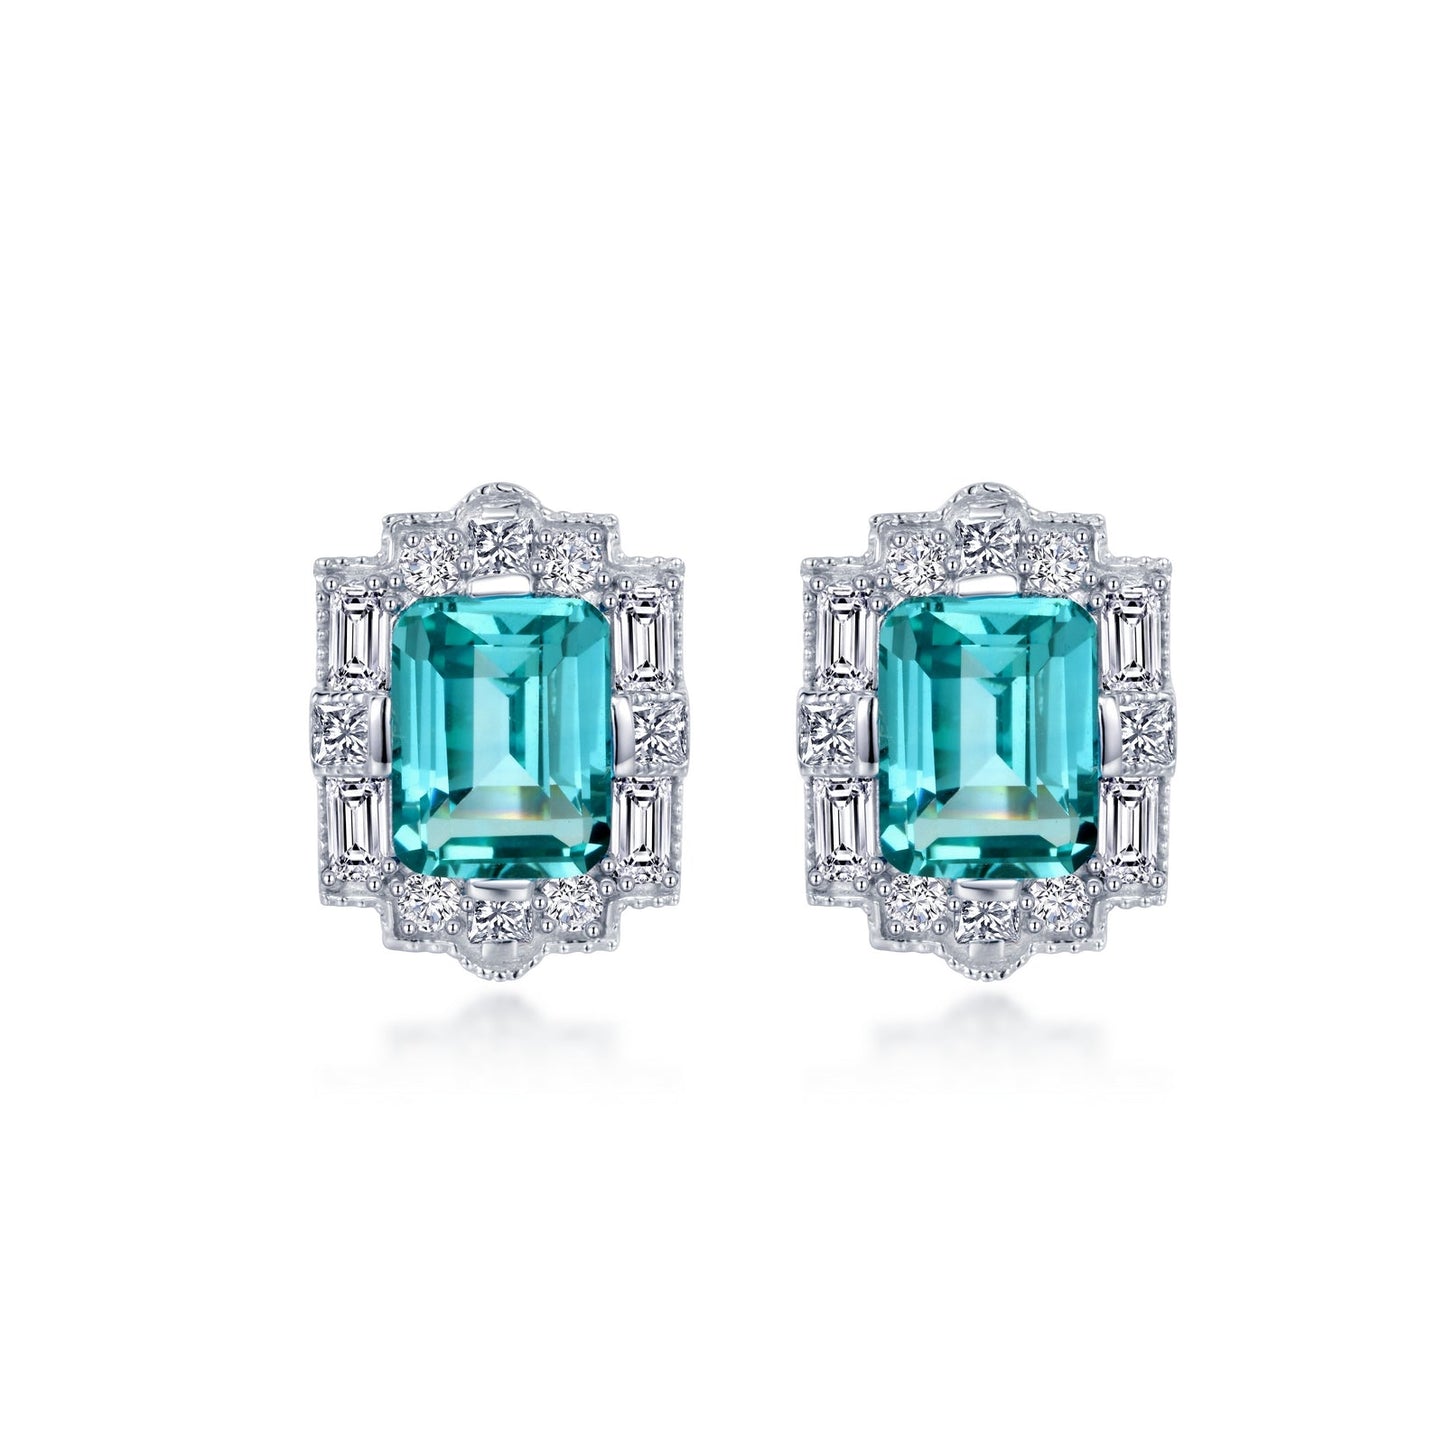 Load image into Gallery viewer, Lafonn Fancy Lab-Grown Sapphire Halo Stud Earrings GREEN CORUNDUM EARRINGS Platinum Appx CTW: 7.48 cts CTS Approx. 16mm (H) x 12mm (W)
